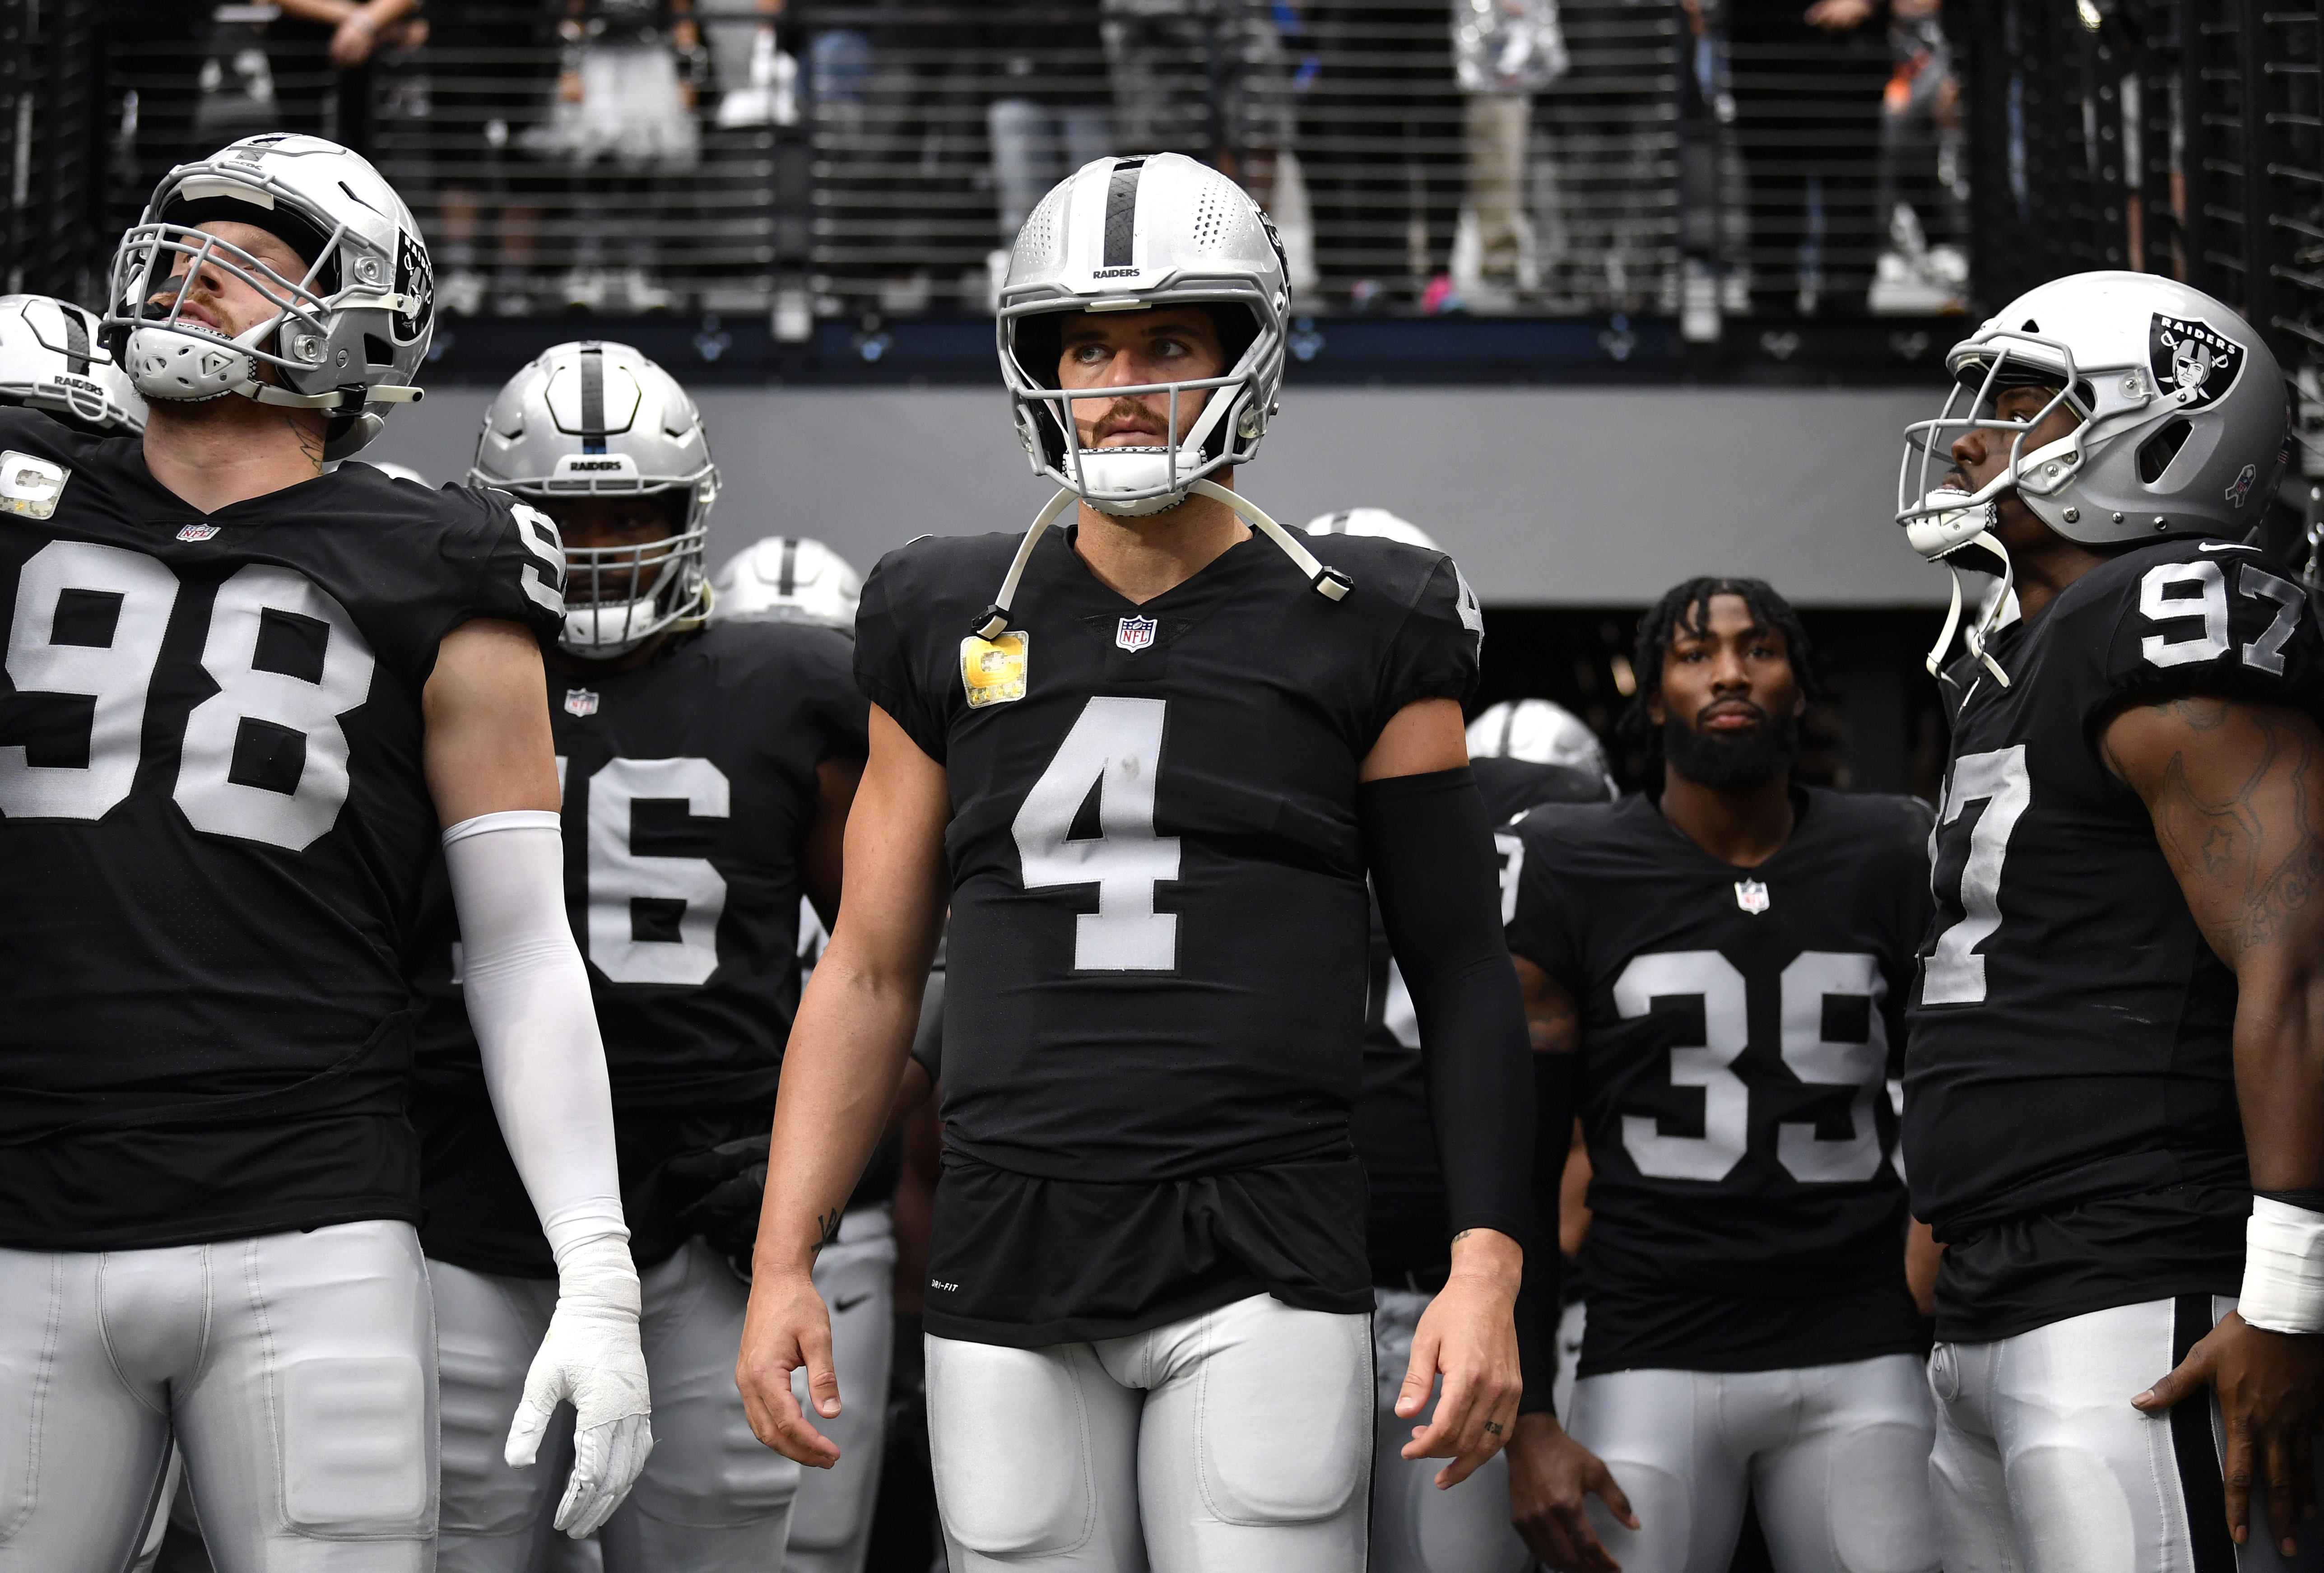 NFL quarterback Derek Carr leads the Raiders into a must-win game on Thanksgiving